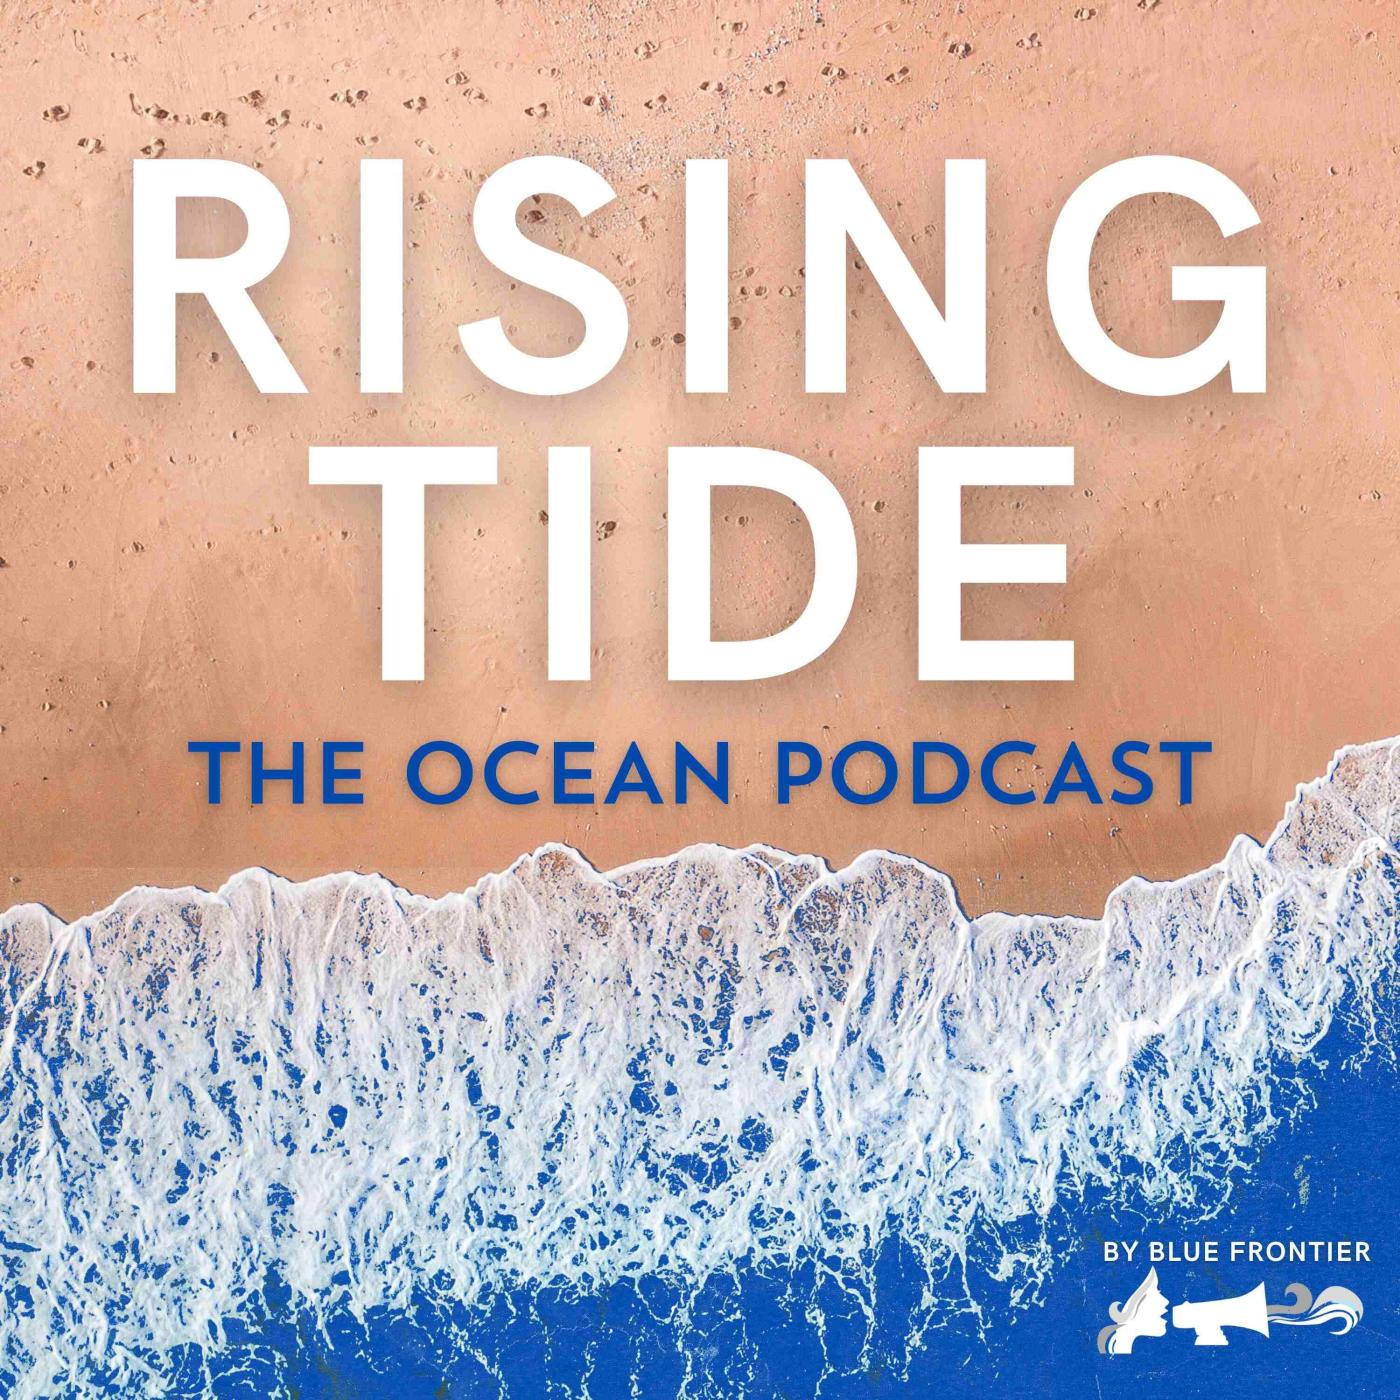 Rising Tide: The Ocean Podcast on Apple Podcasts